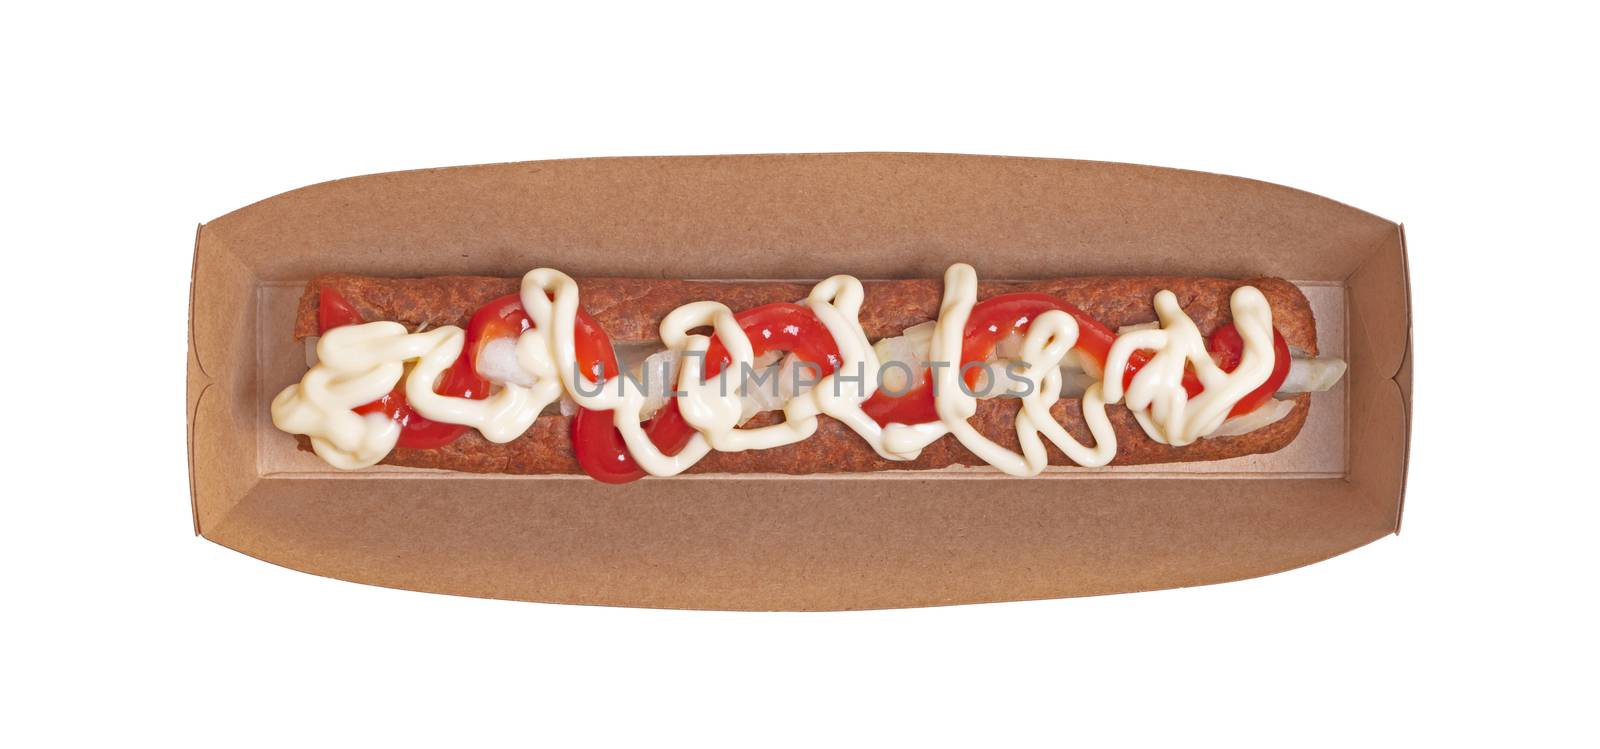 One frikadel with ketchup, mayonnaise on chopped onions, a Dutch fast food snack called 'frikadel speciaal', the Netherlands